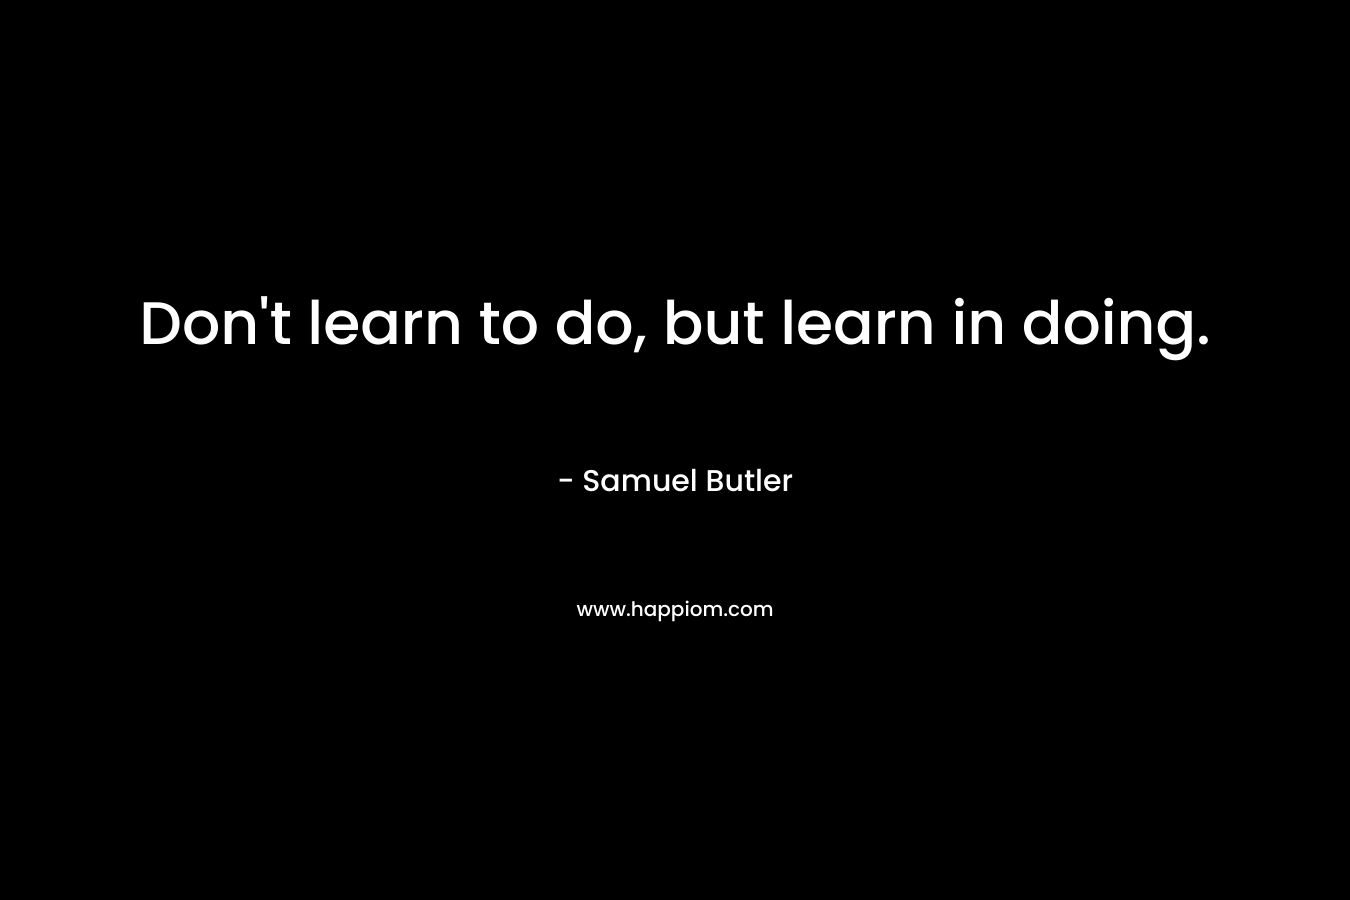 Don’t learn to do, but learn in doing. – Samuel Butler